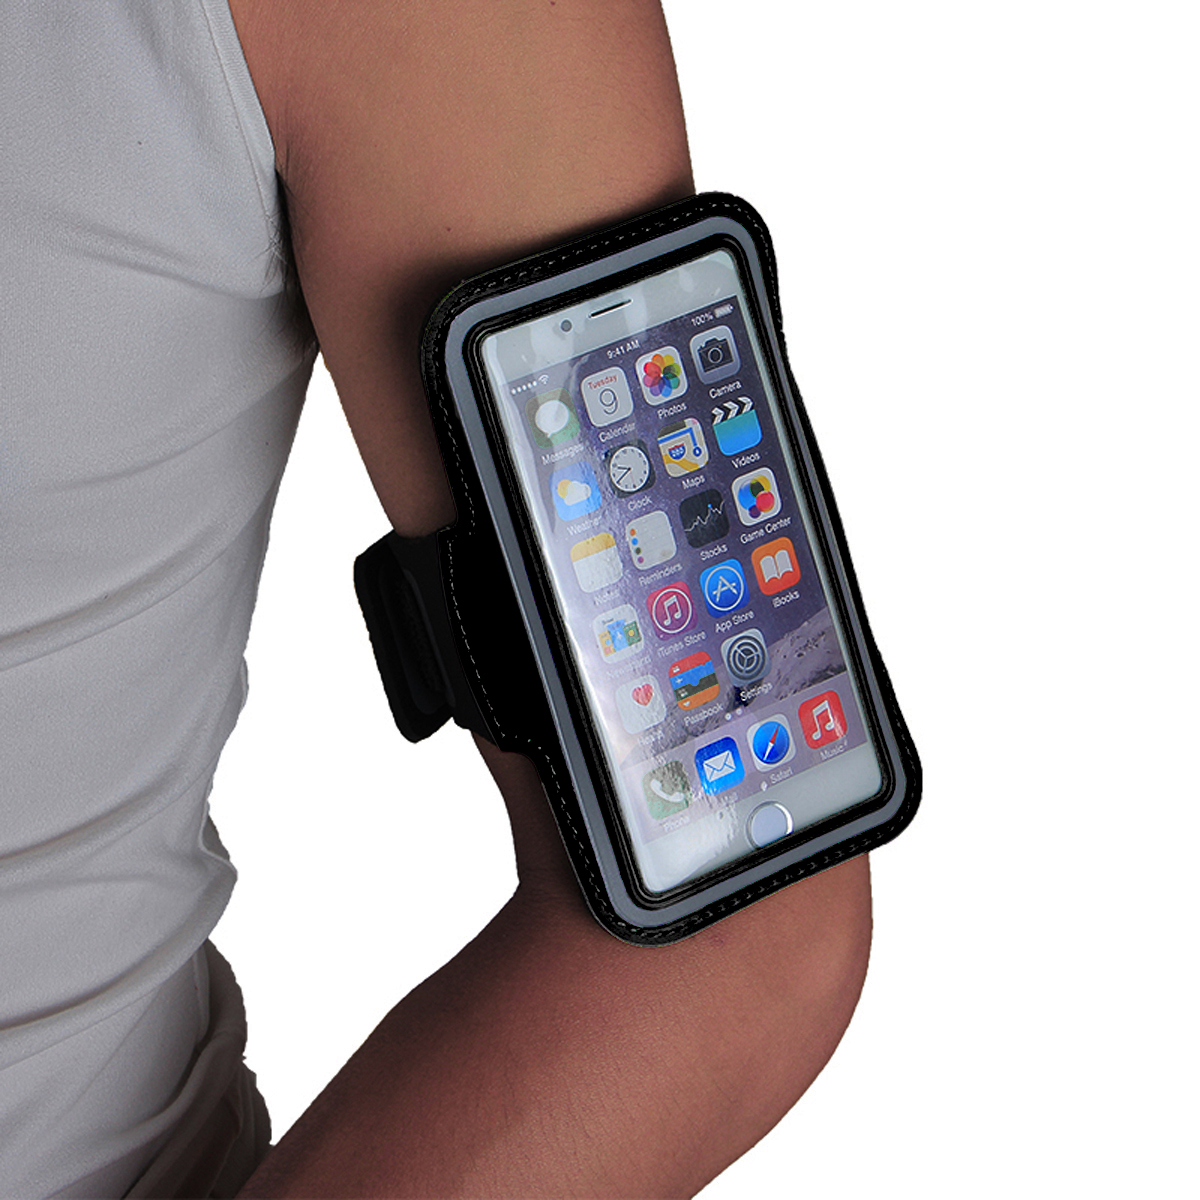 Universal-Sports-Elastic-Armband-Sweatproof-Touch-Screen-Mobile-Phone-Arm-Bags-with-Earphone-Port-fo-1890480-13